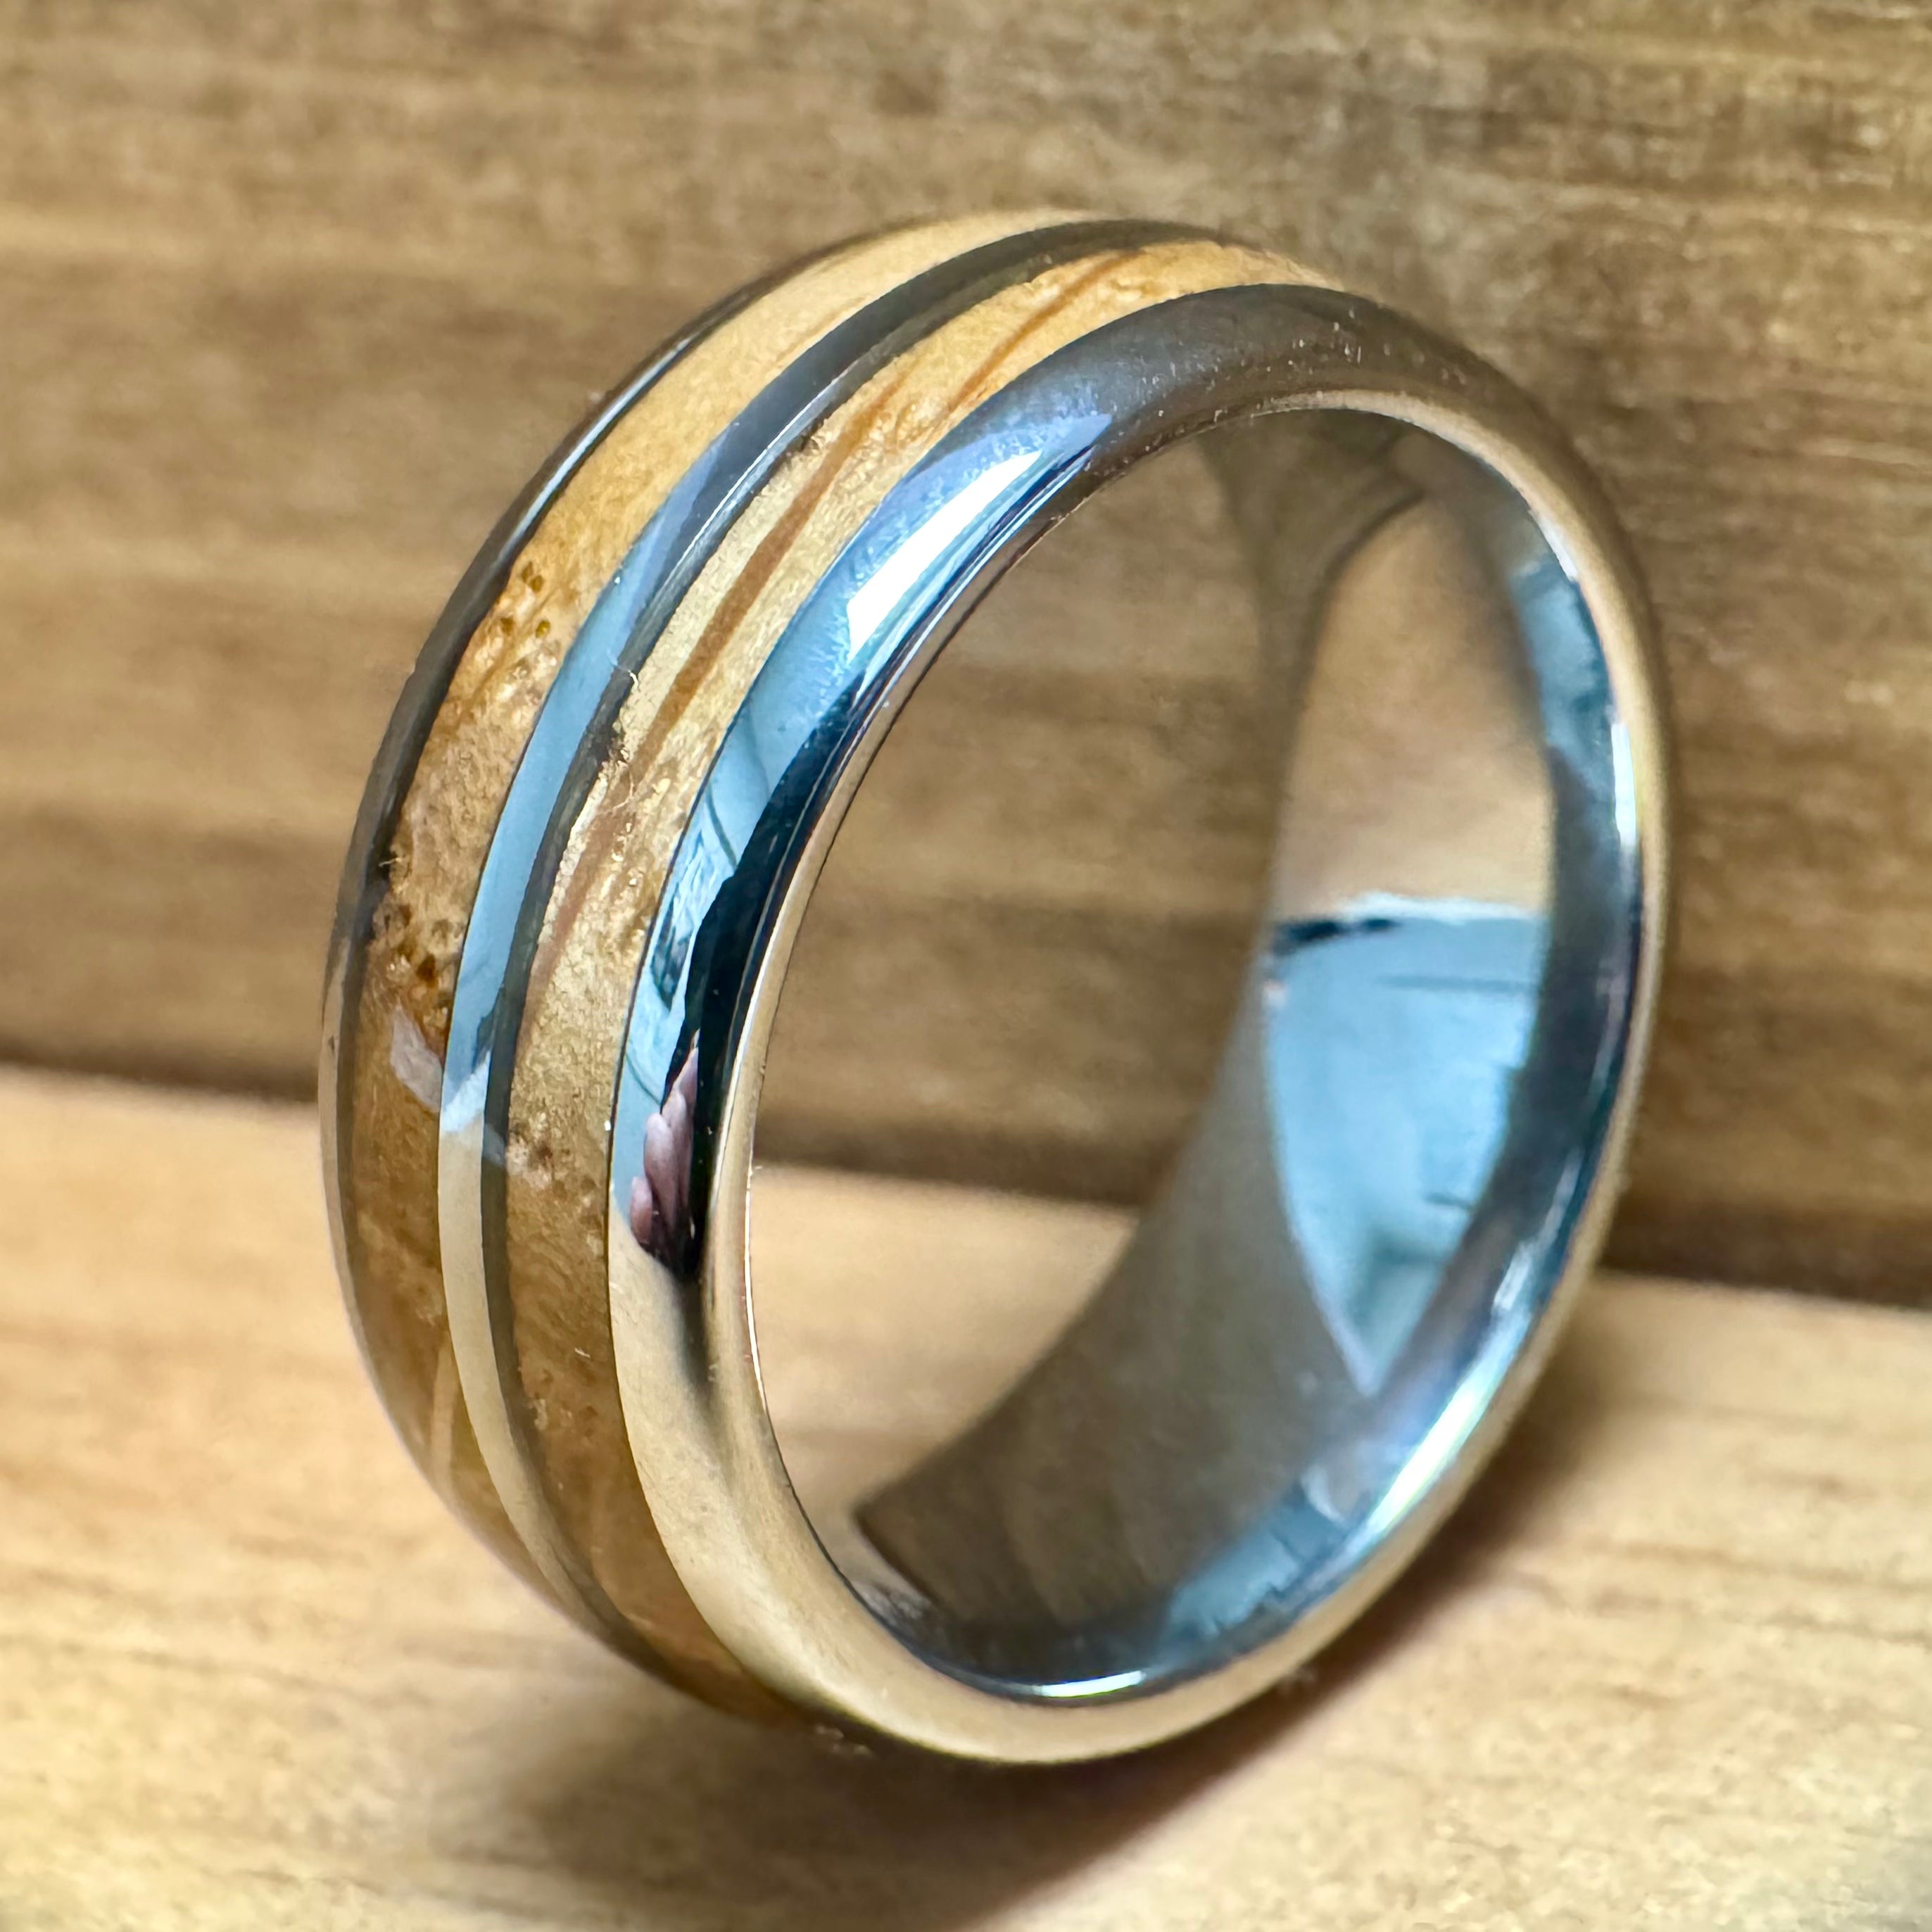 BW James Jewelers ALT Wedding Band “The Bootlegger” Tungsten Ring With Reclaimed Bourbon Whiskey Barrel Wood